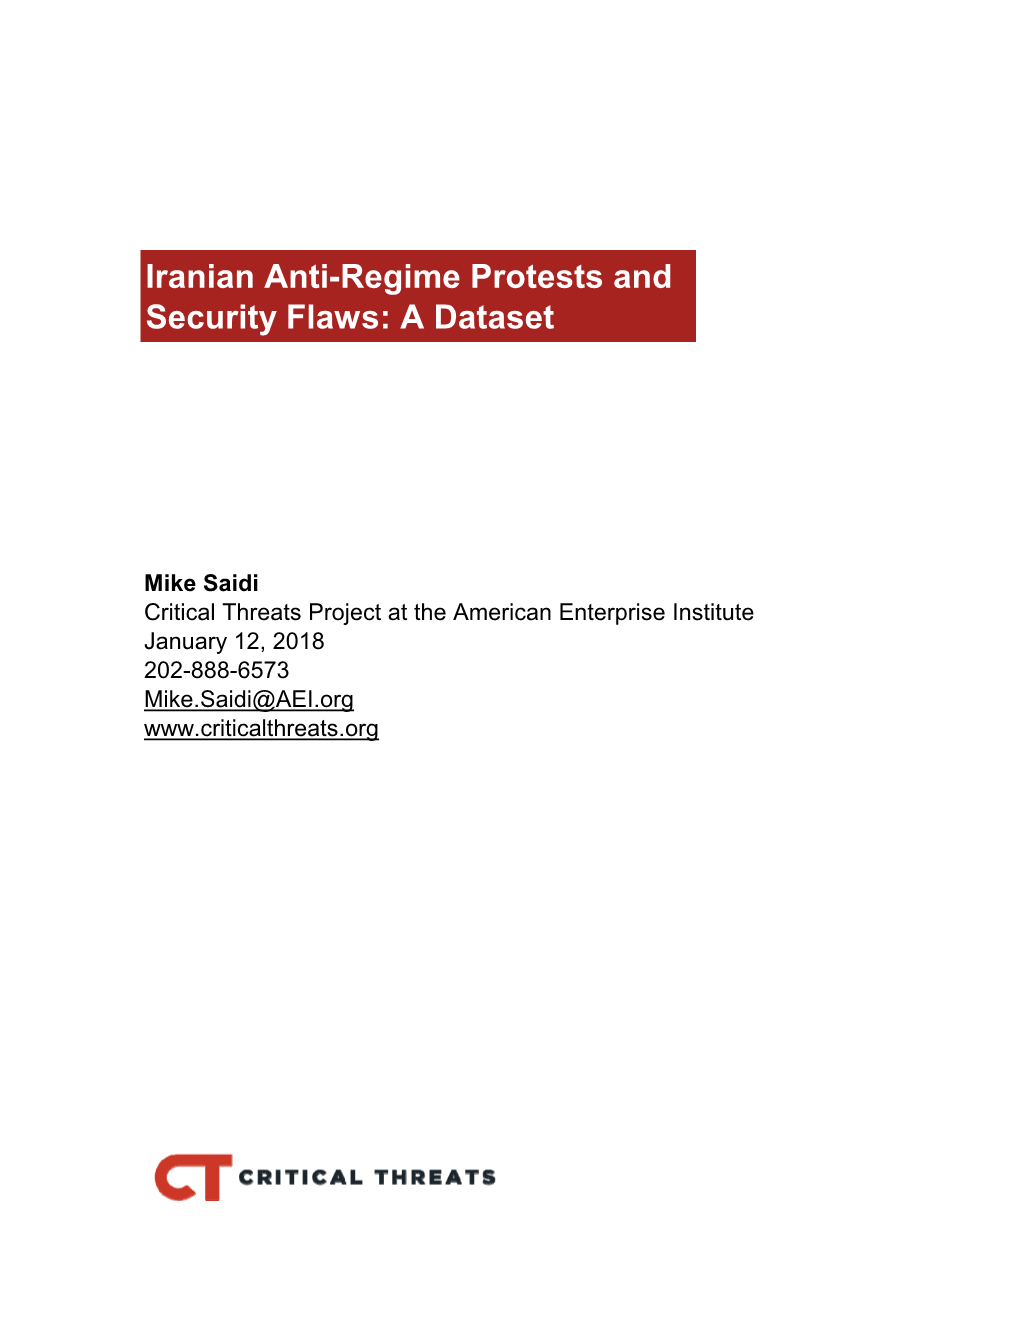 Iranian Anti-Regime Protests and Security Flaws: a Dataset